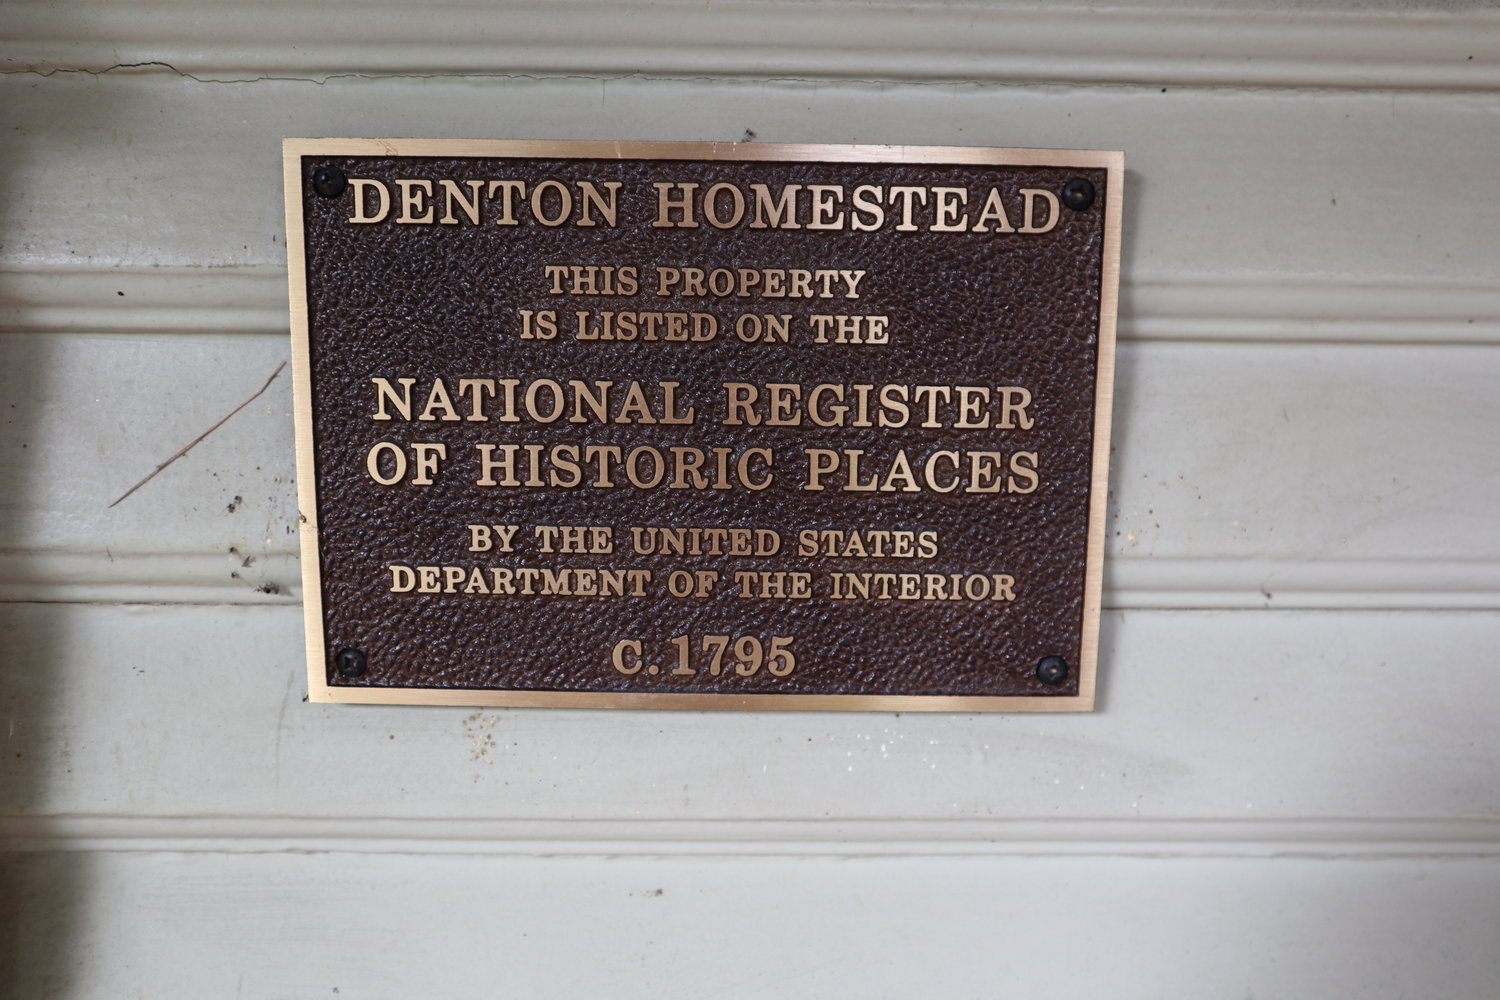 The Denton Homestead was designated a national landmark in 2014 and received a plaque in October 2016.